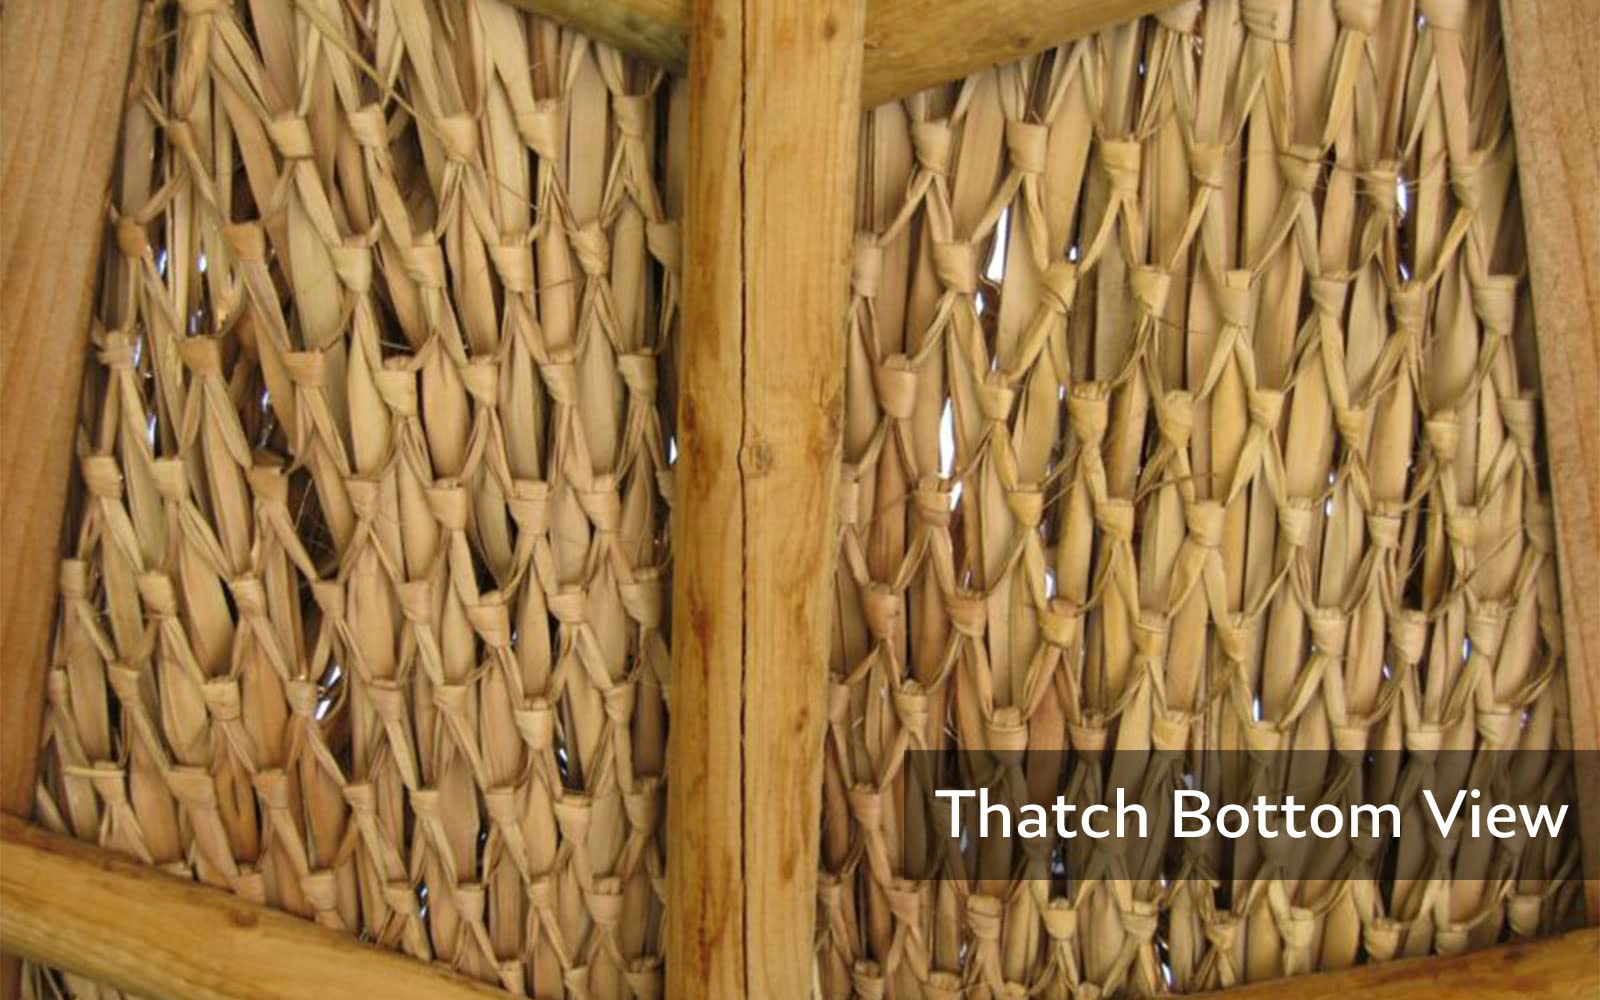 FOREVER BAMBOO Mexican Thatch Roof Runner Roll Duck Blind Grass Tiki Hut Thatch Duck Boat Blinds Palapa Thatch Roofing for Tiki Bar Huts, Tan, 35